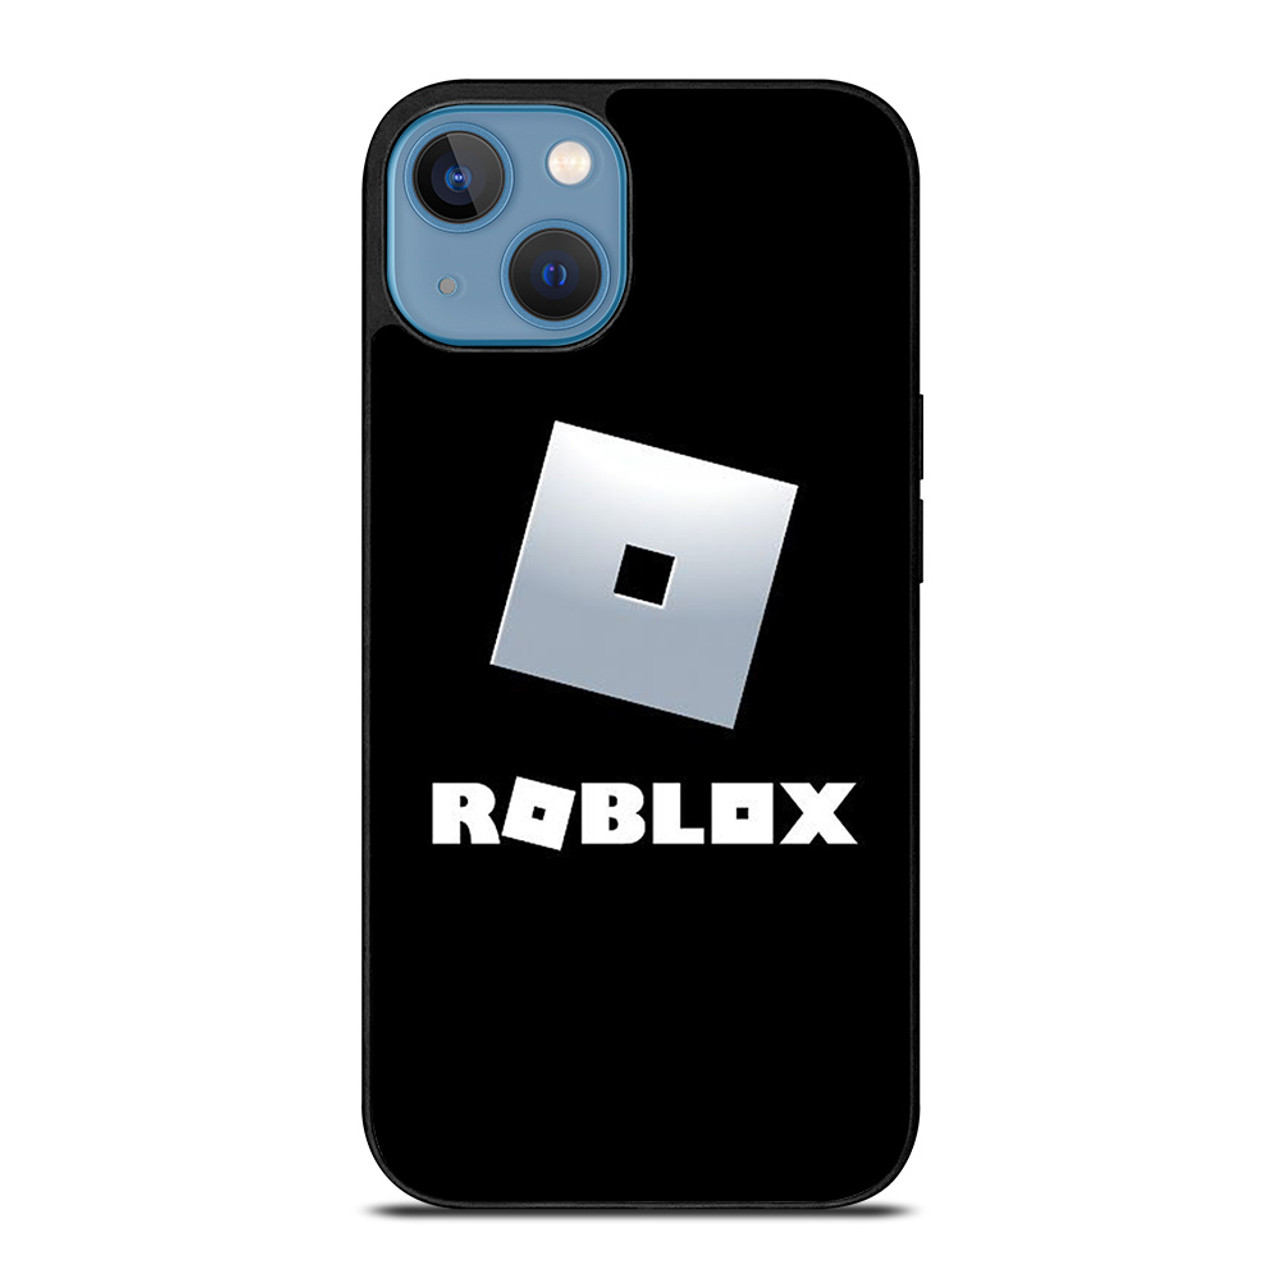 https://cdn11.bigcommerce.com/s-fuuucjkmh6/images/stencil/1280x1280/products/212038/249307/ROBLOX%20GAME%20LOGO__96660.1675152662.jpg?c=1